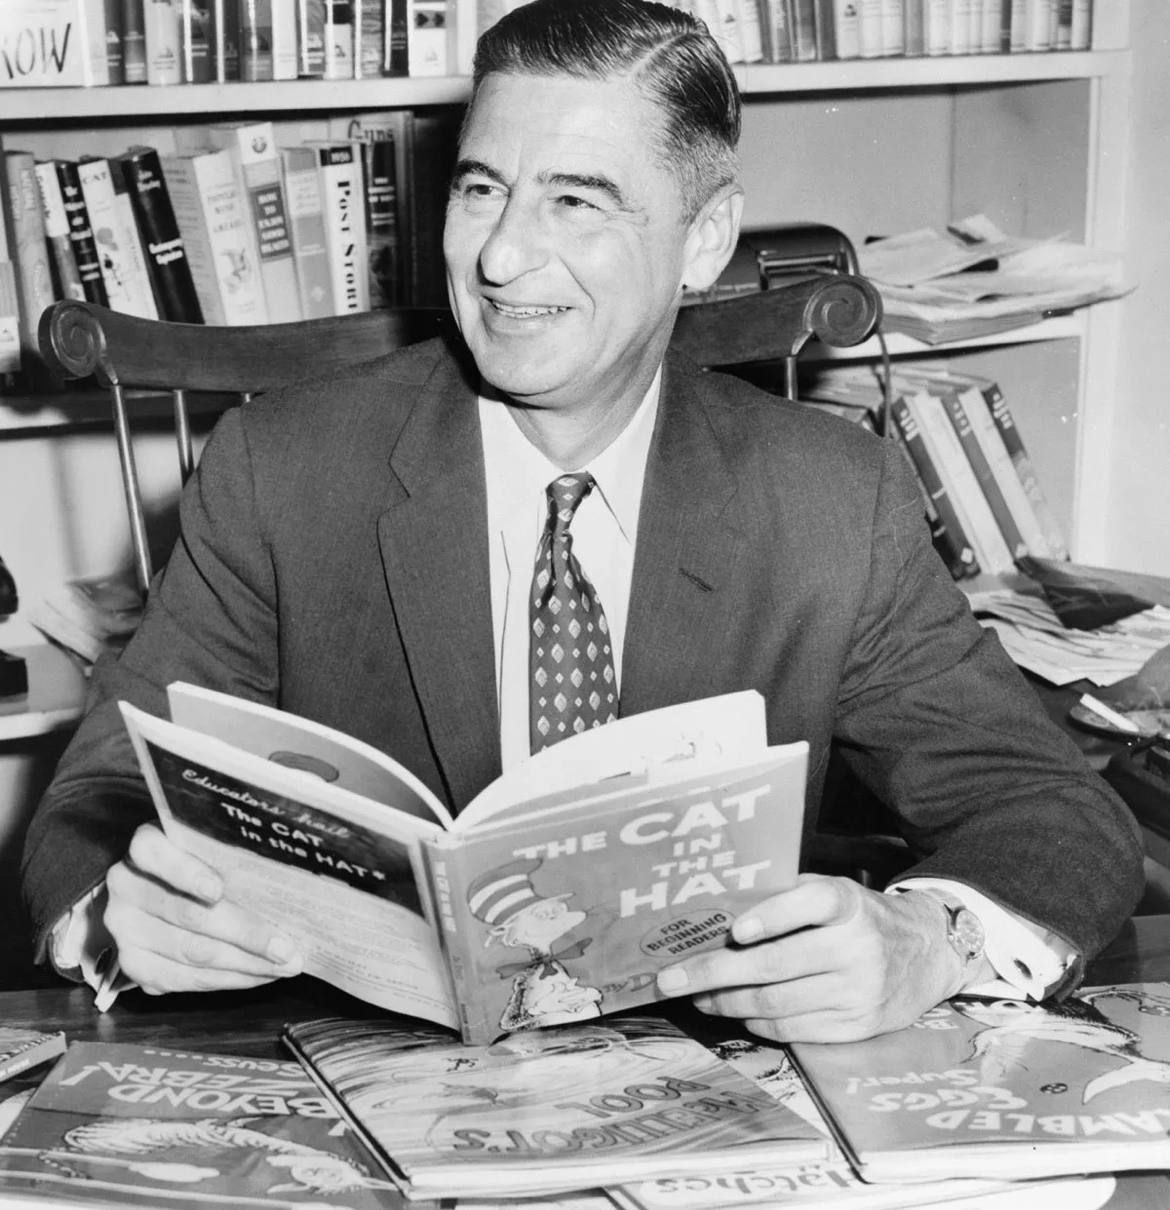 Dr. Seuss’s Literary Canon: How Many Books Did He Write?